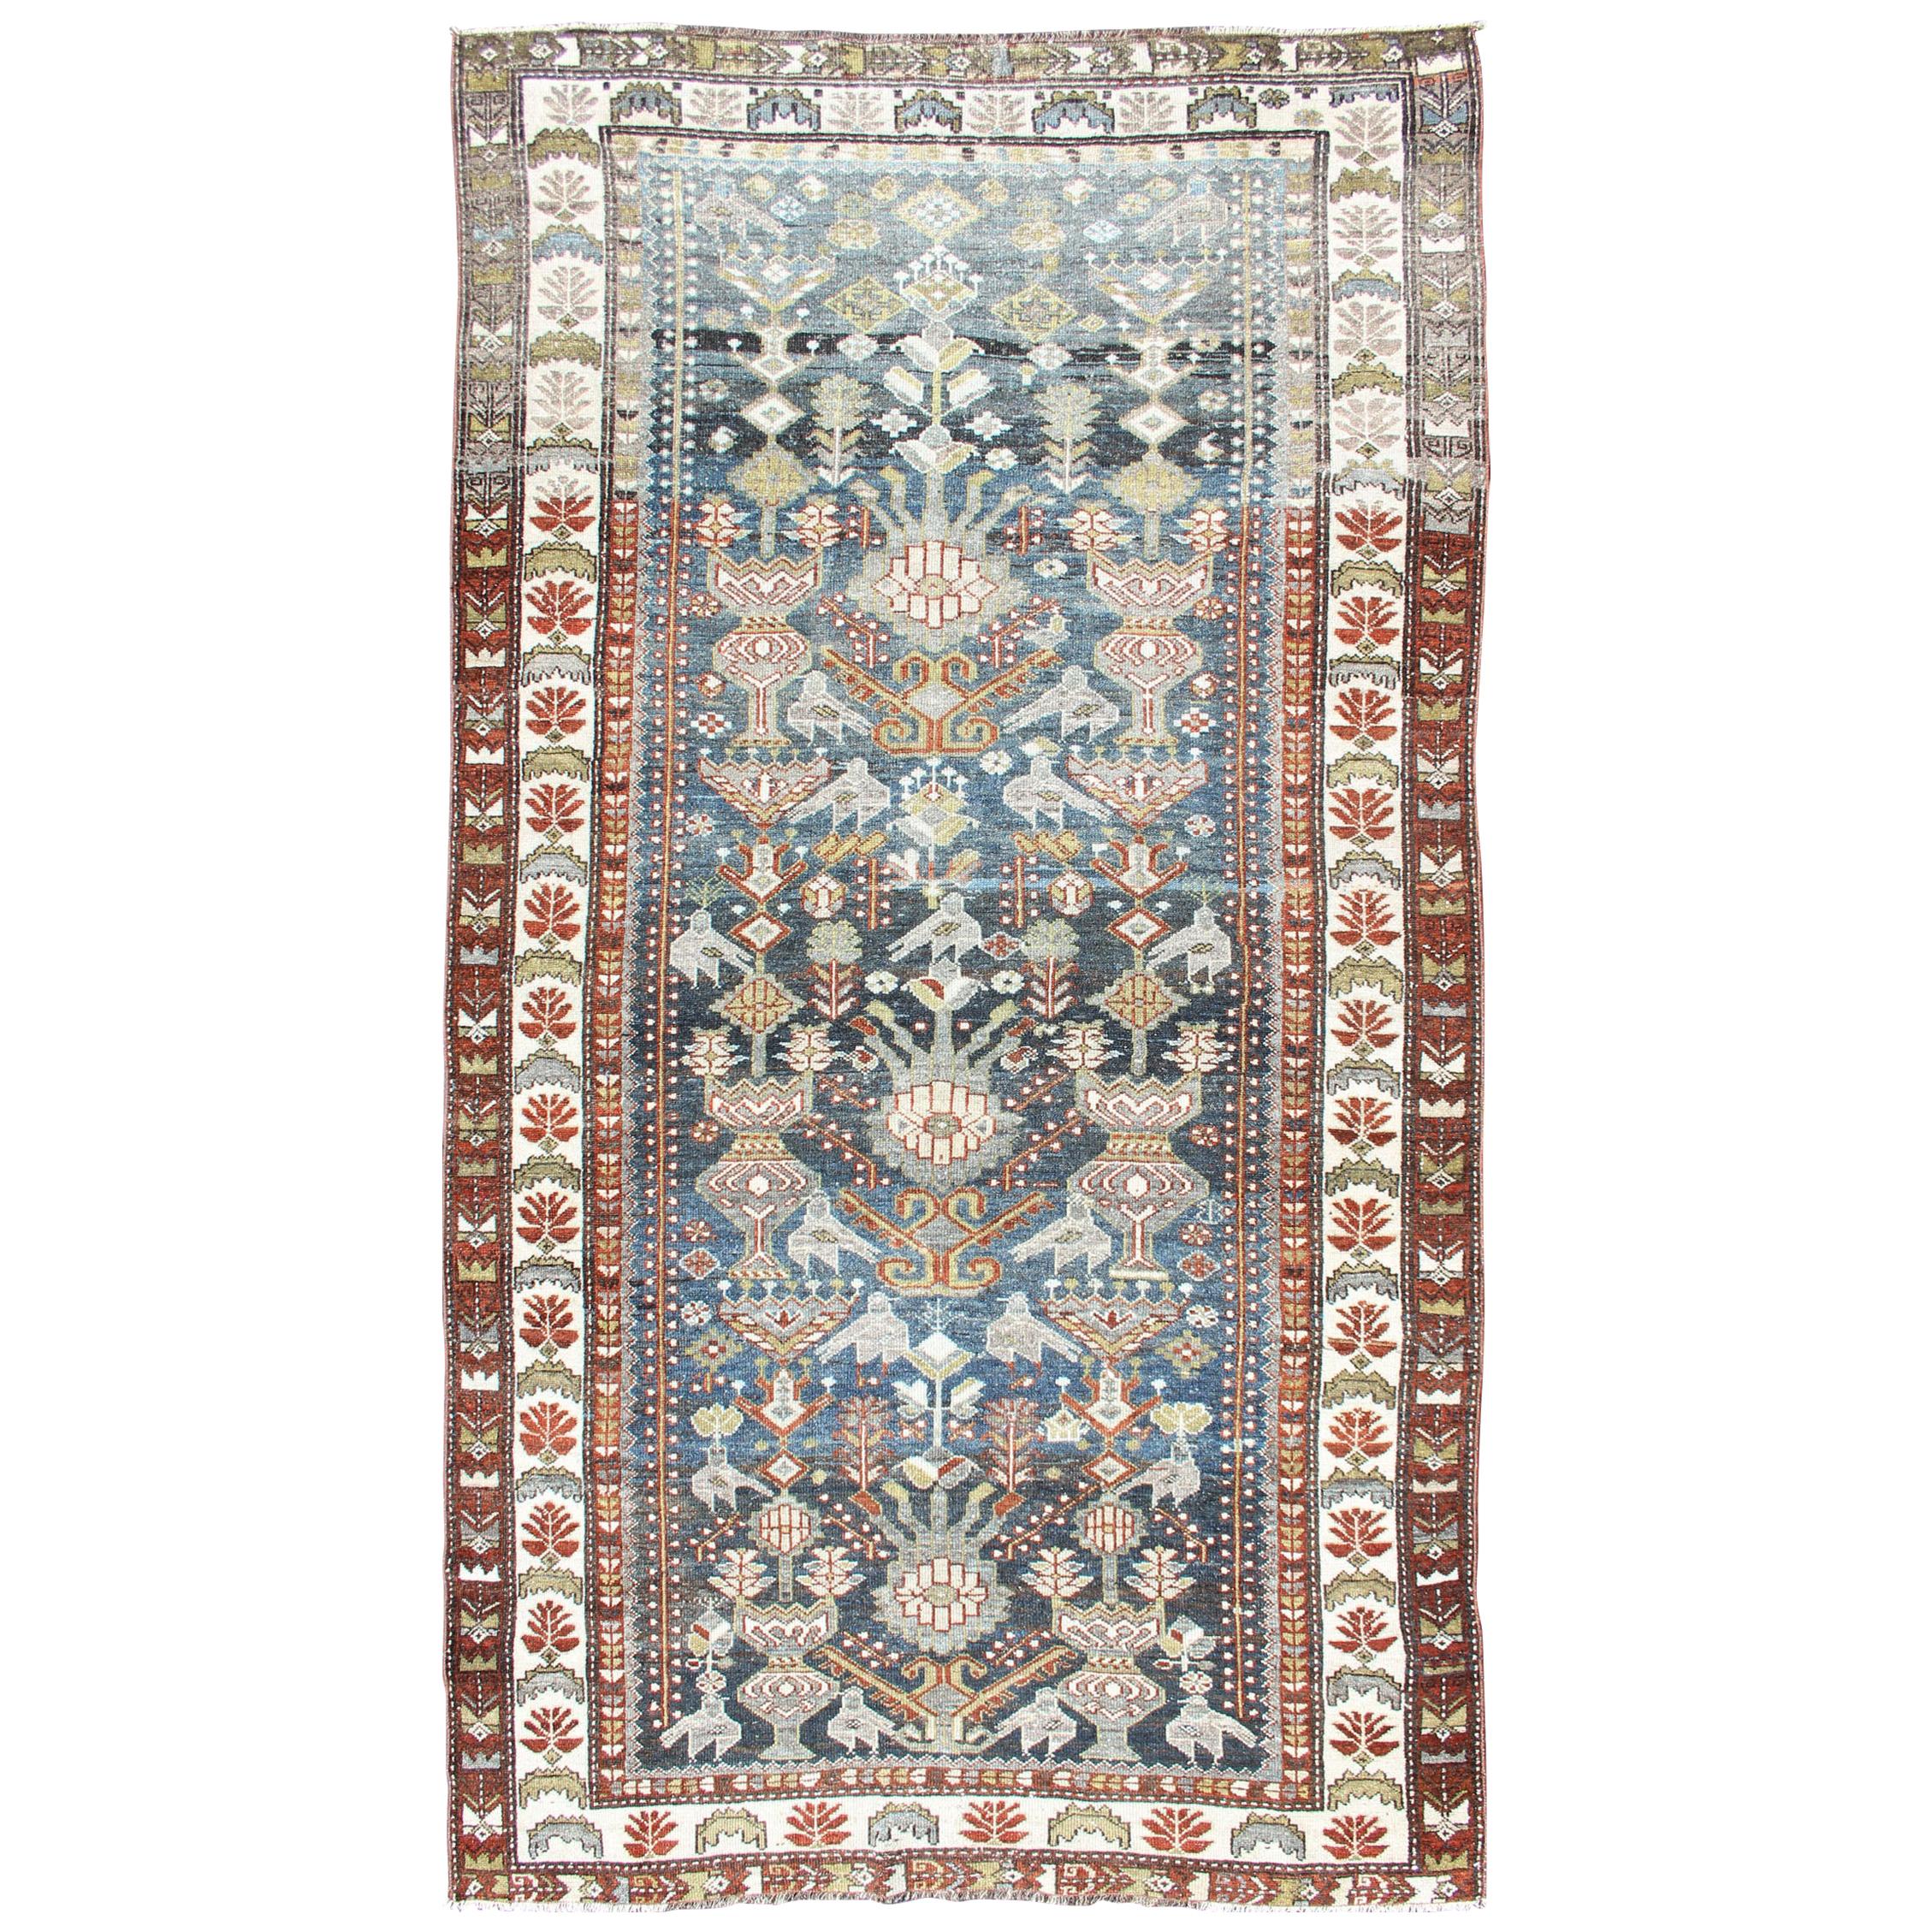  Antique Persian Bakhitari Rug with All-Over Patten in Steel Blue Background